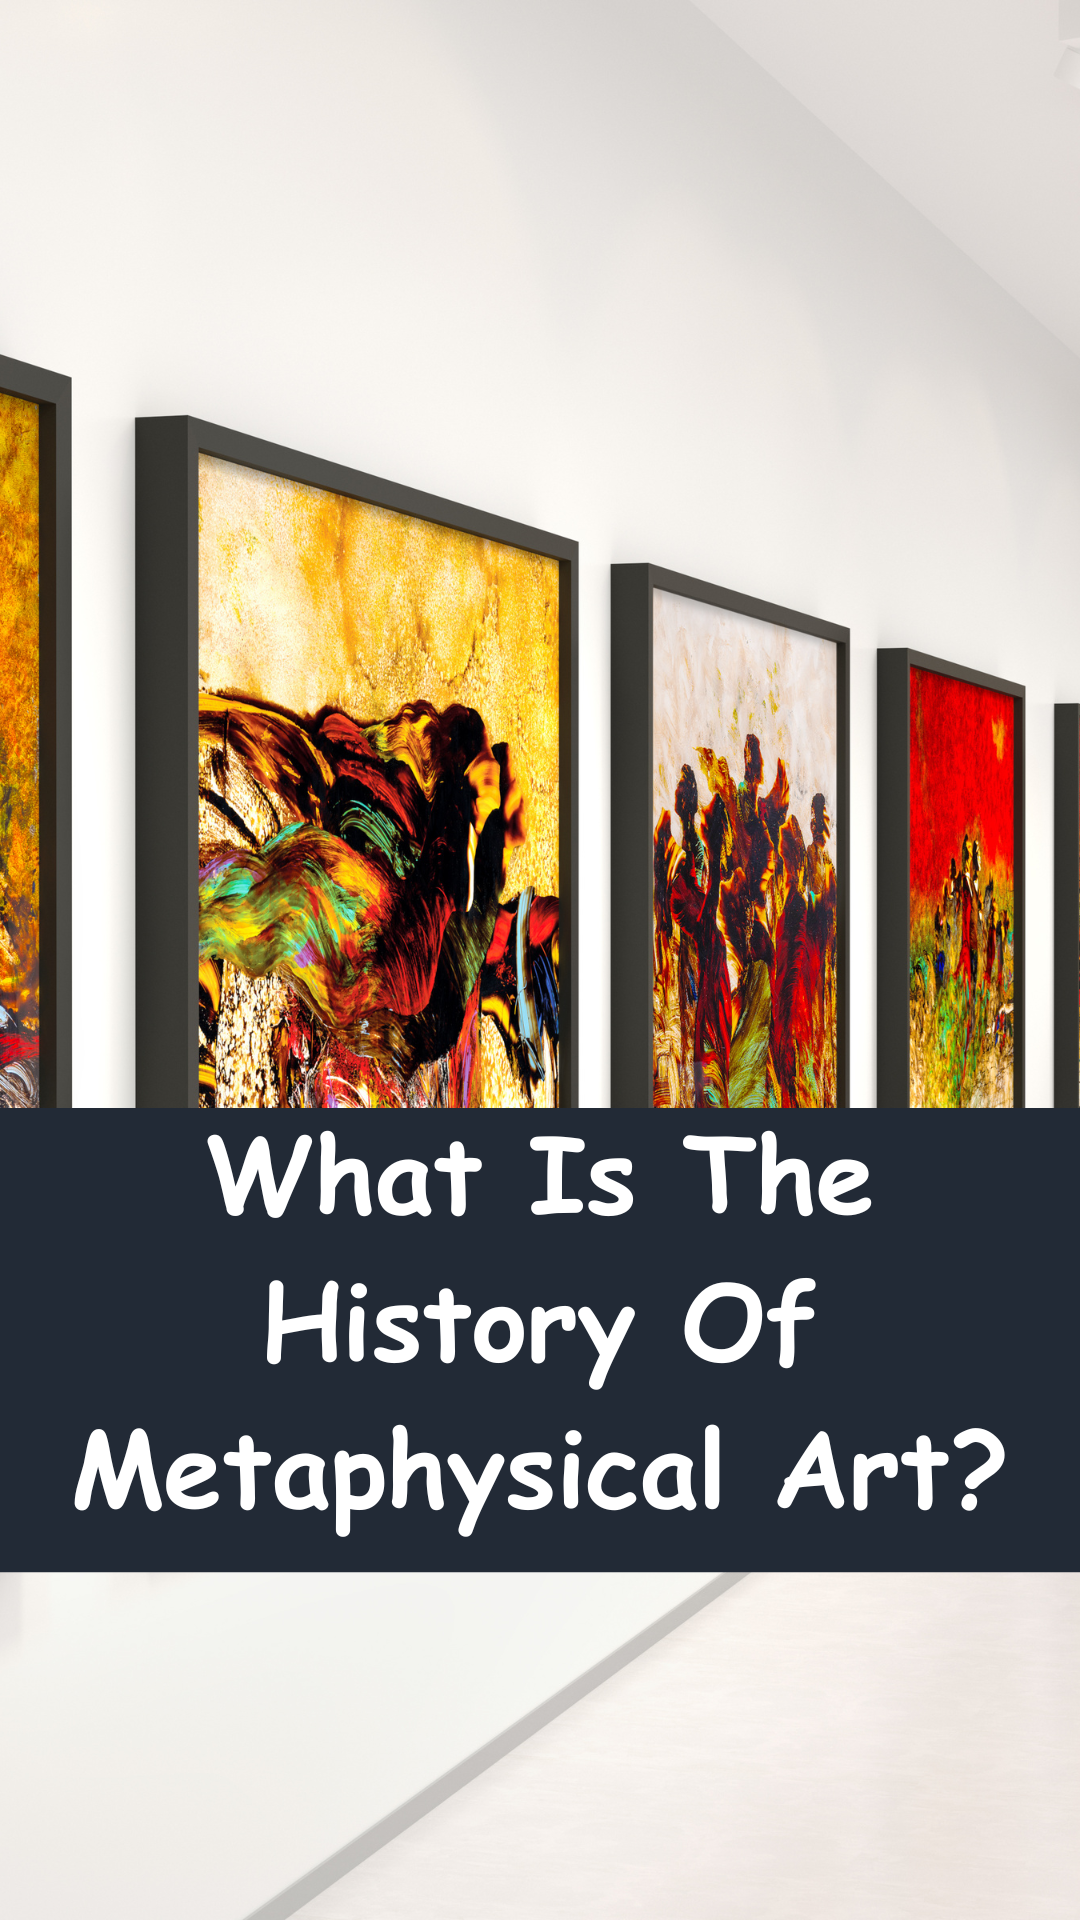 What Is The History Of Metaphysical Art?